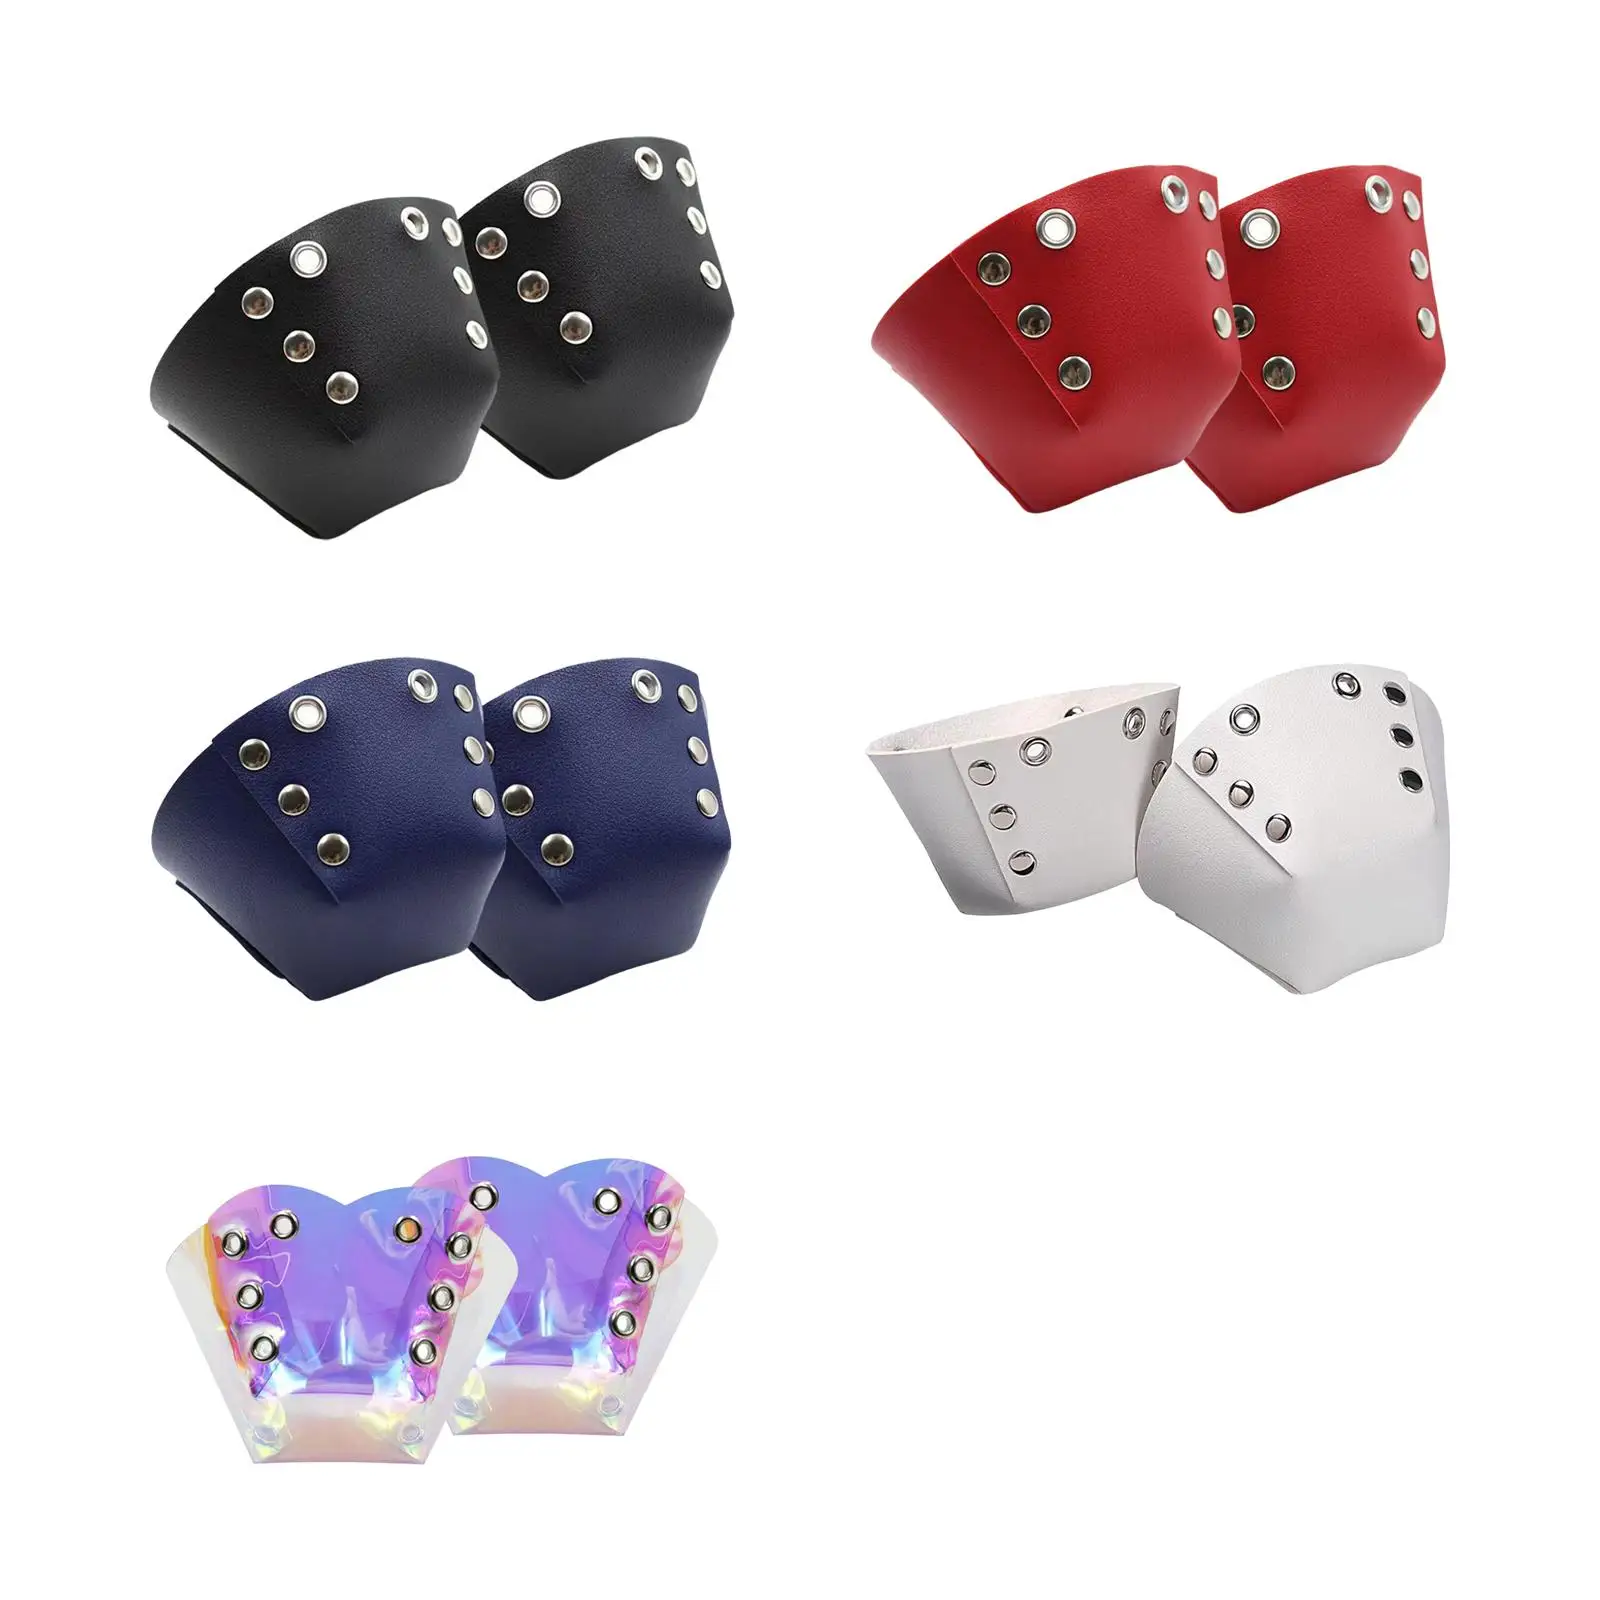 Roller Skate Toe Guards Accs PU Leather Roller Skating Protection Toe Covers